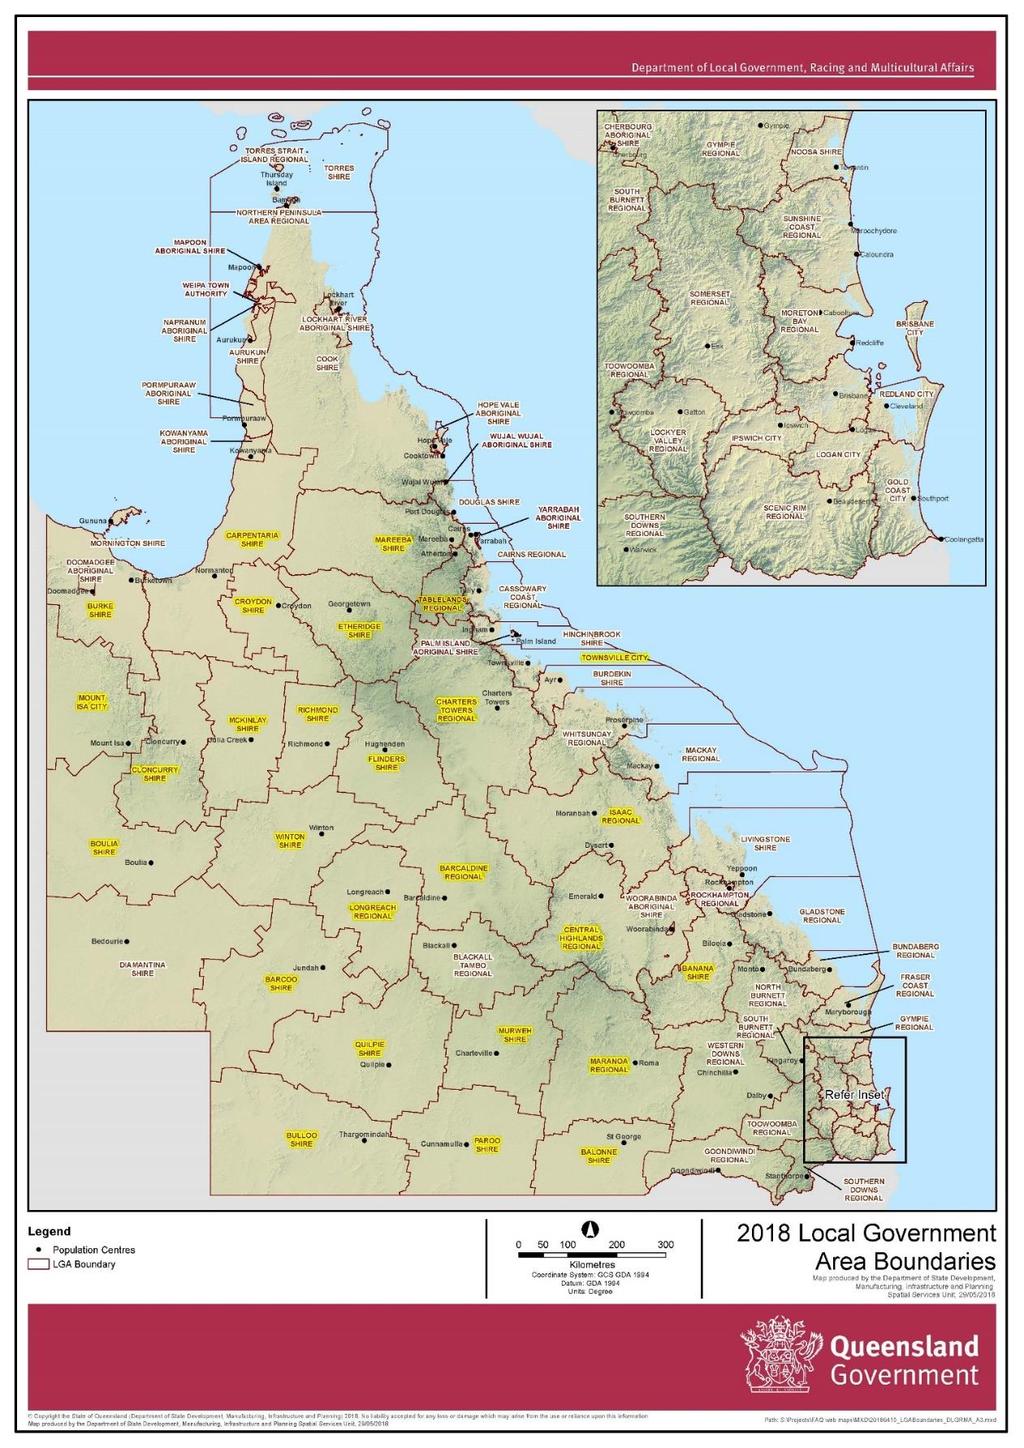 THIS DOCUMENT HAS BEEN PREPARED BY THE IQ-RAP WORKING GROUP ON BEHALF OF ALL 28 LOCAL GOVERNMENTS, 5 RDAS and RACQ PARTNERS AND THEIR COMMUNITIES PEOPLE 442,012 people (2017; 9% of QLD) 32,199